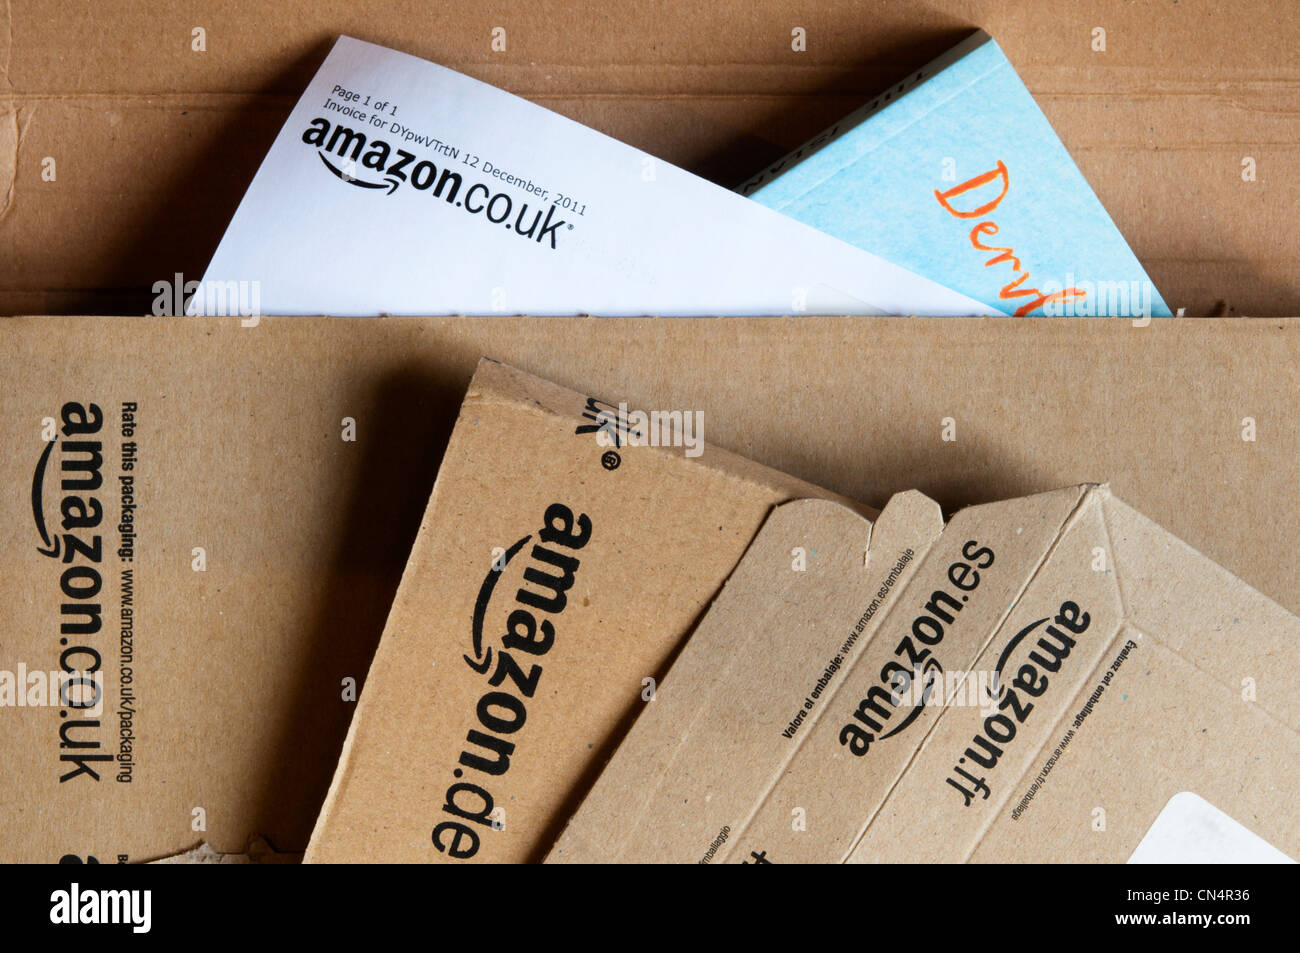 Amazon book packaging showing web site addresses from different countries. Stock Photo